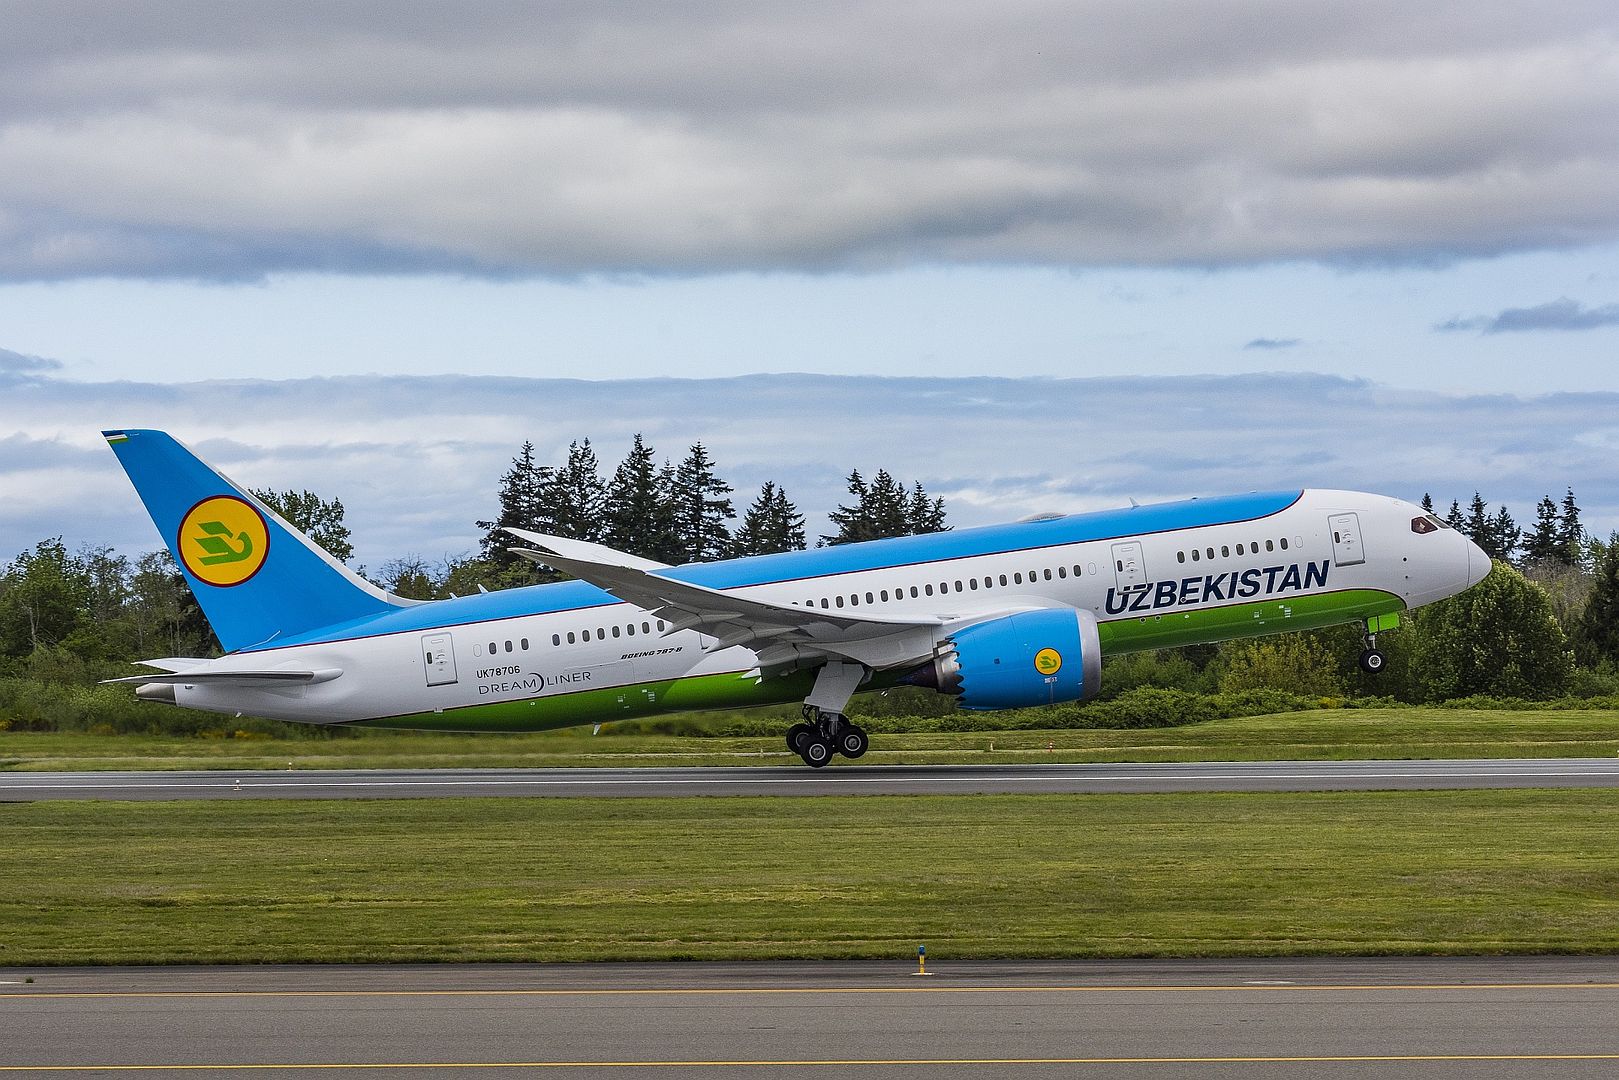 Uzbekistan Humanitarian Delivery Flight Takes Off From Everett